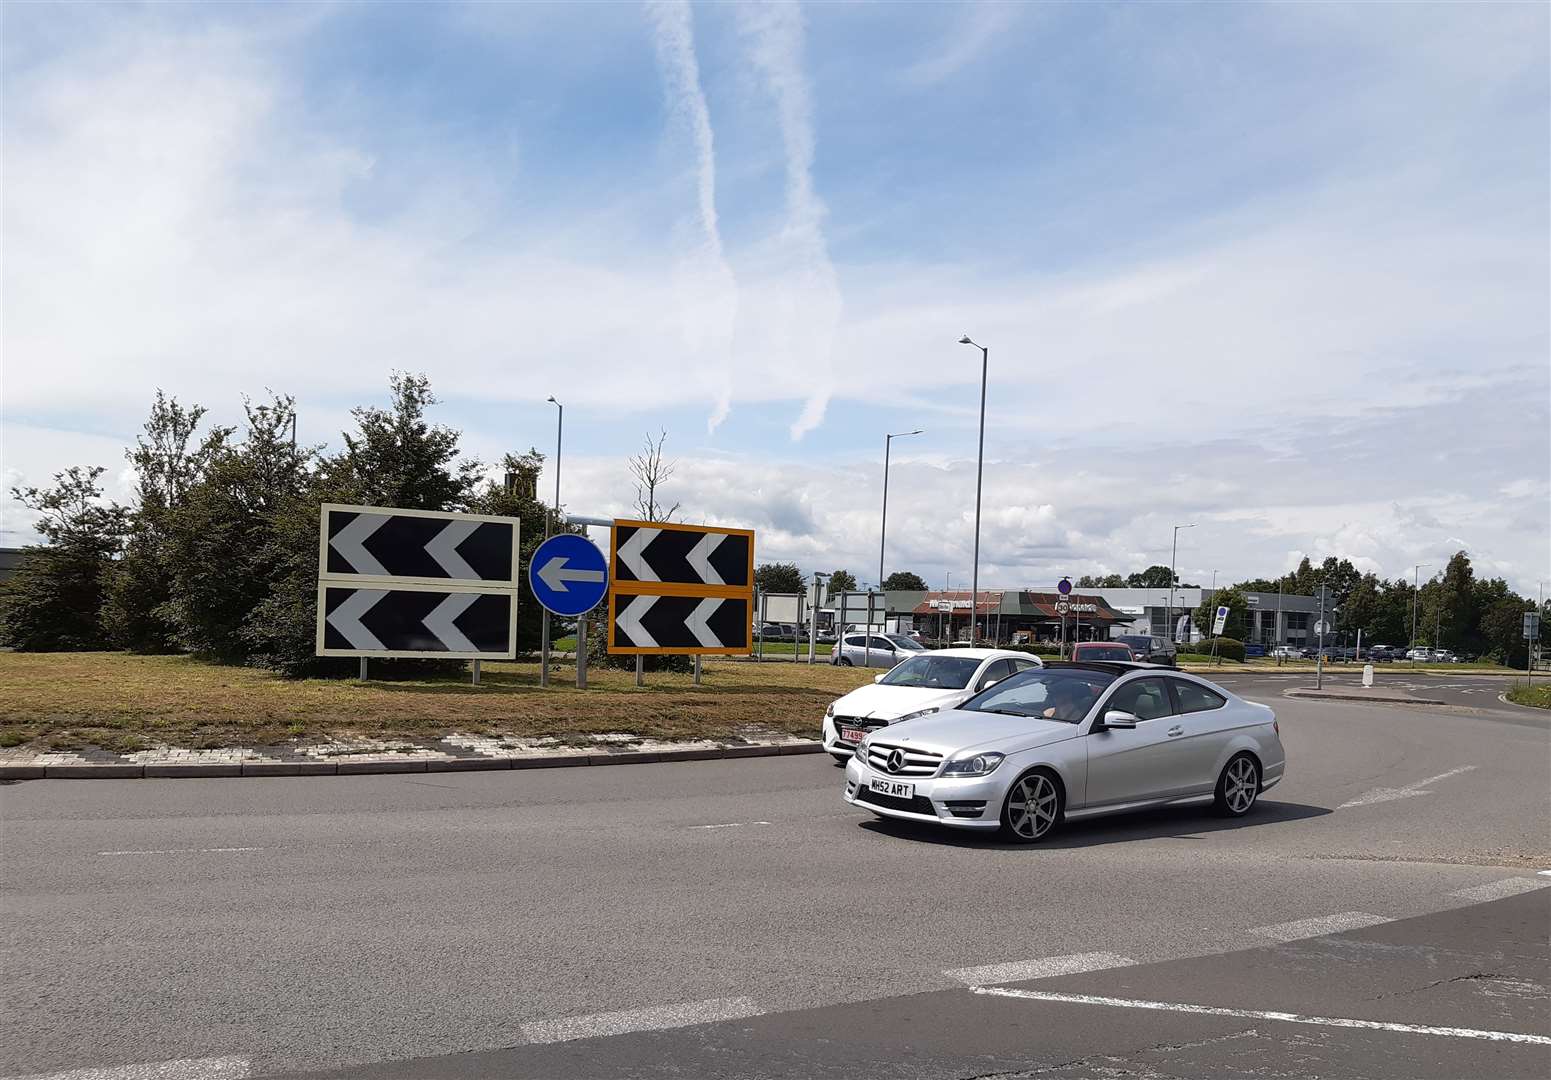 There's more clarification for everyone using roundabouts